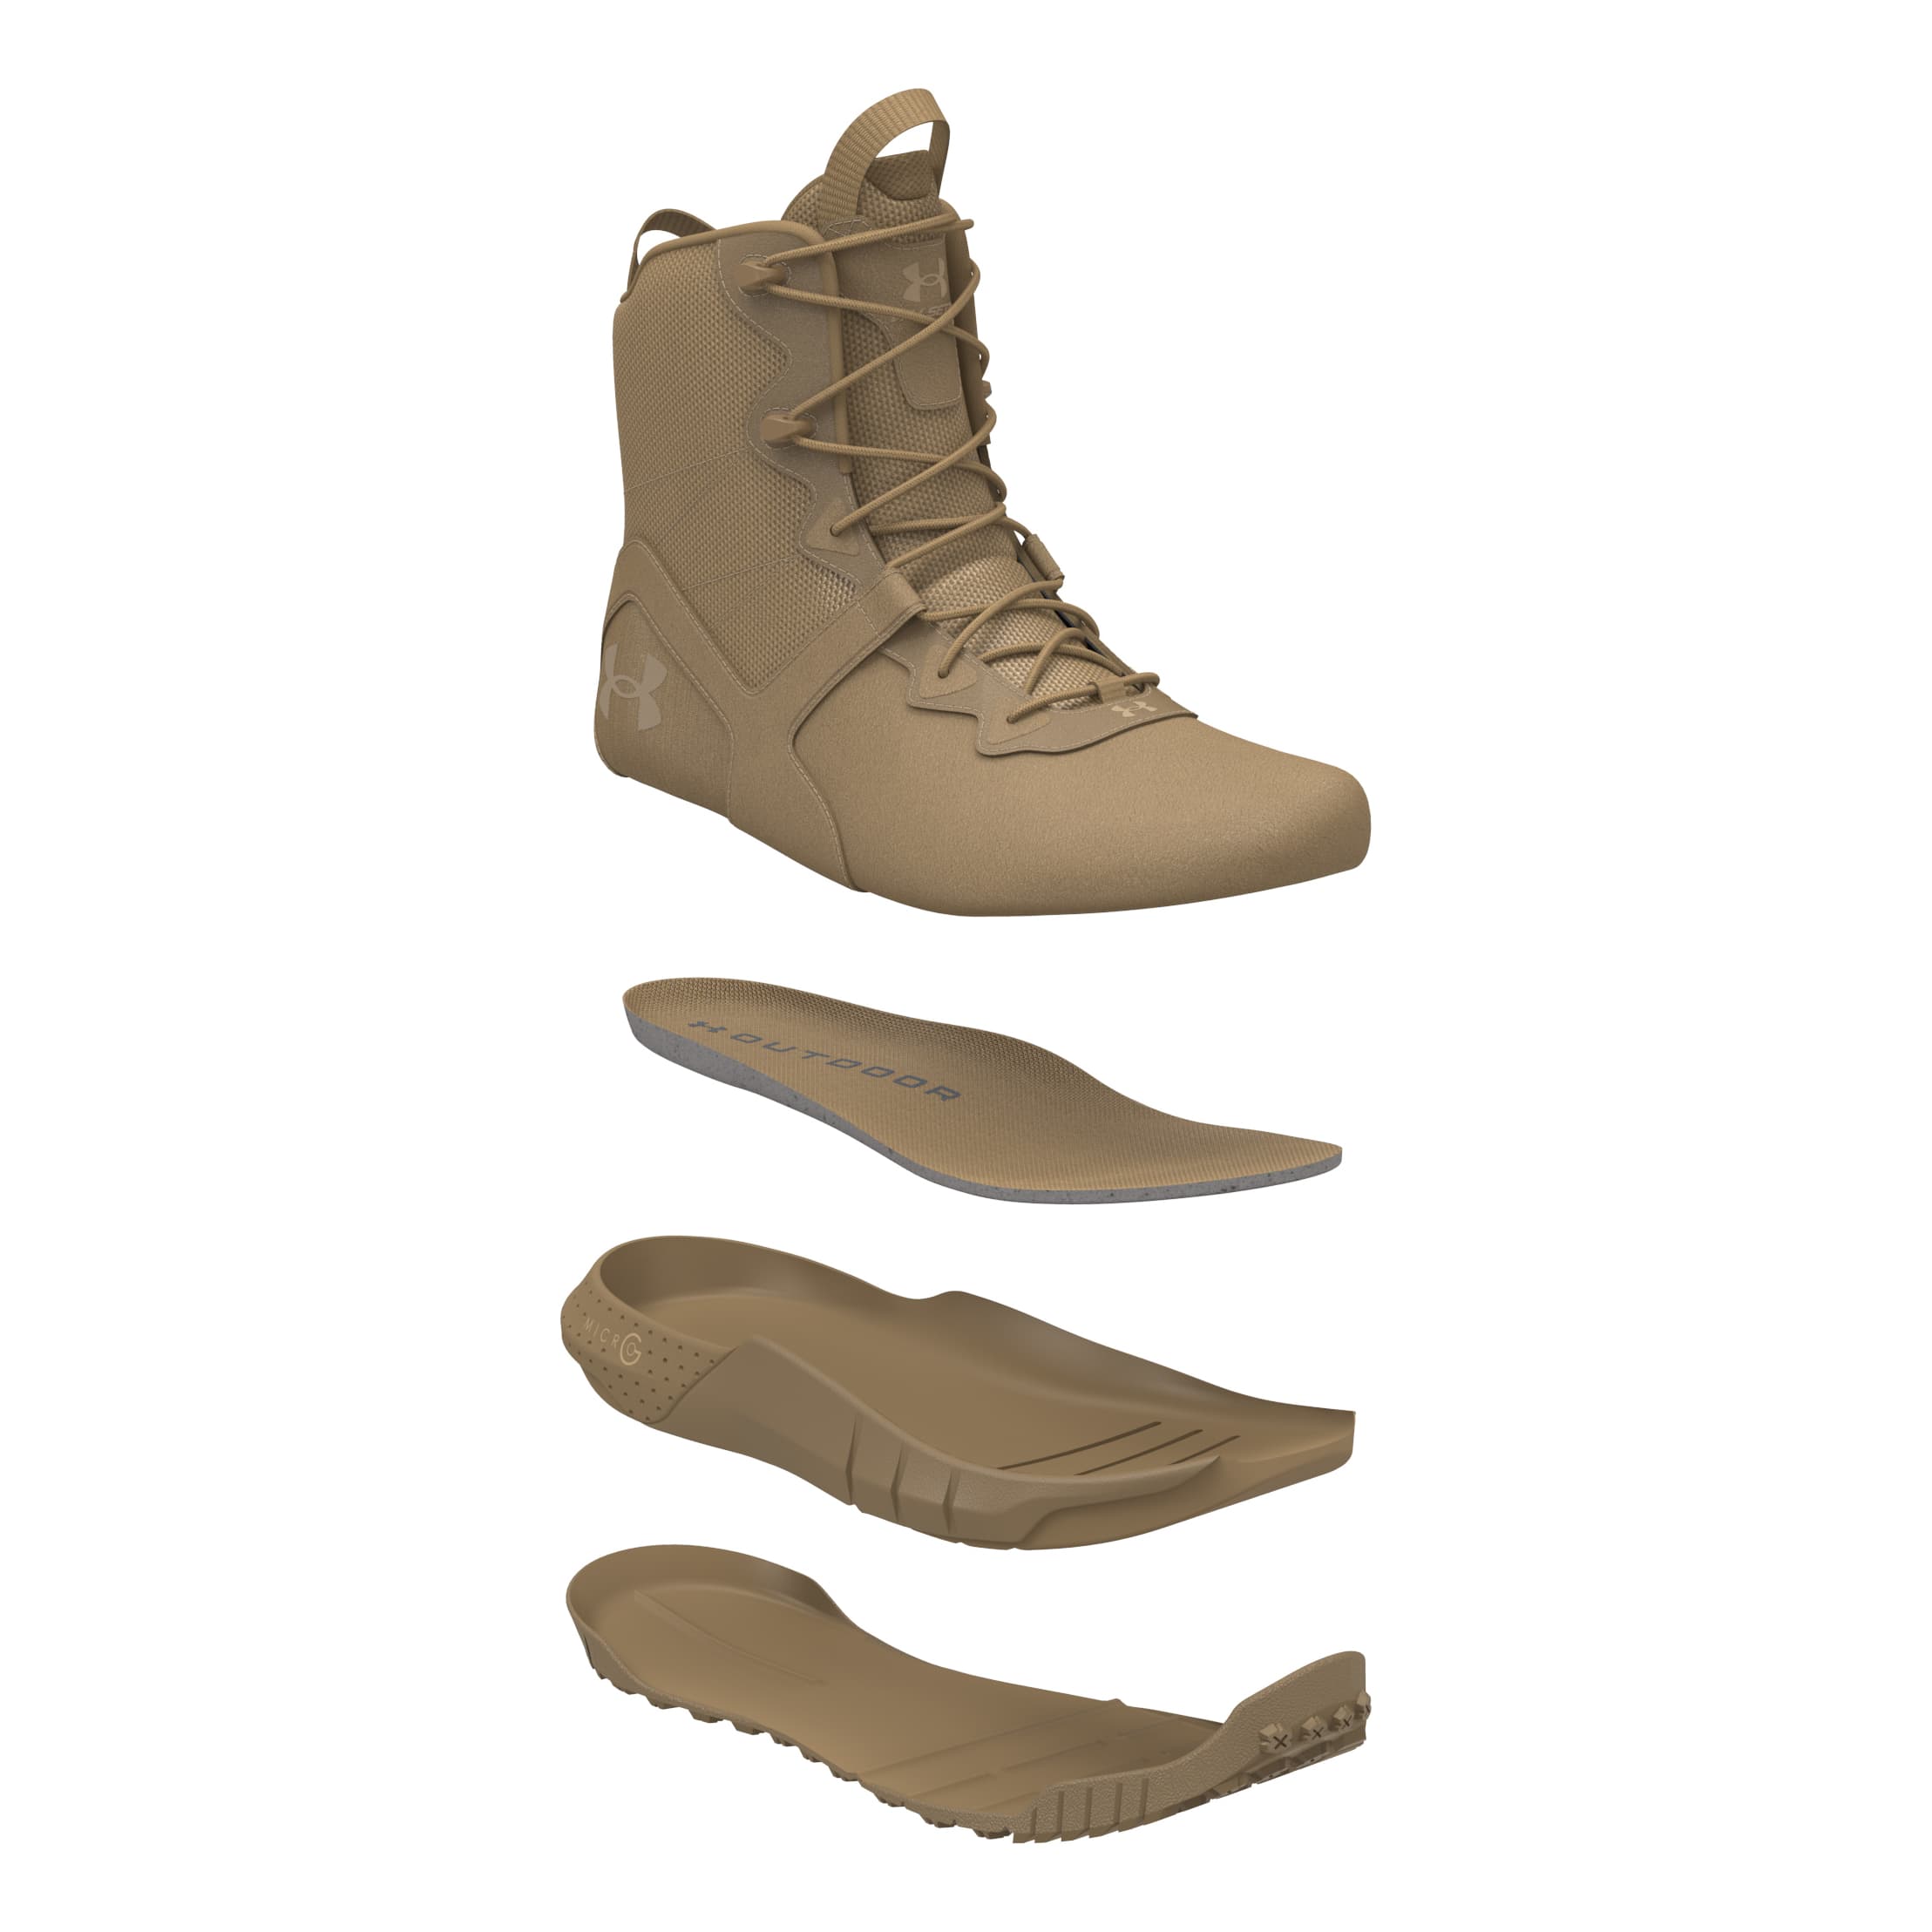 Under Armour® Men’s Micro G Valsetz AR670 Tactical Boot - exploded view